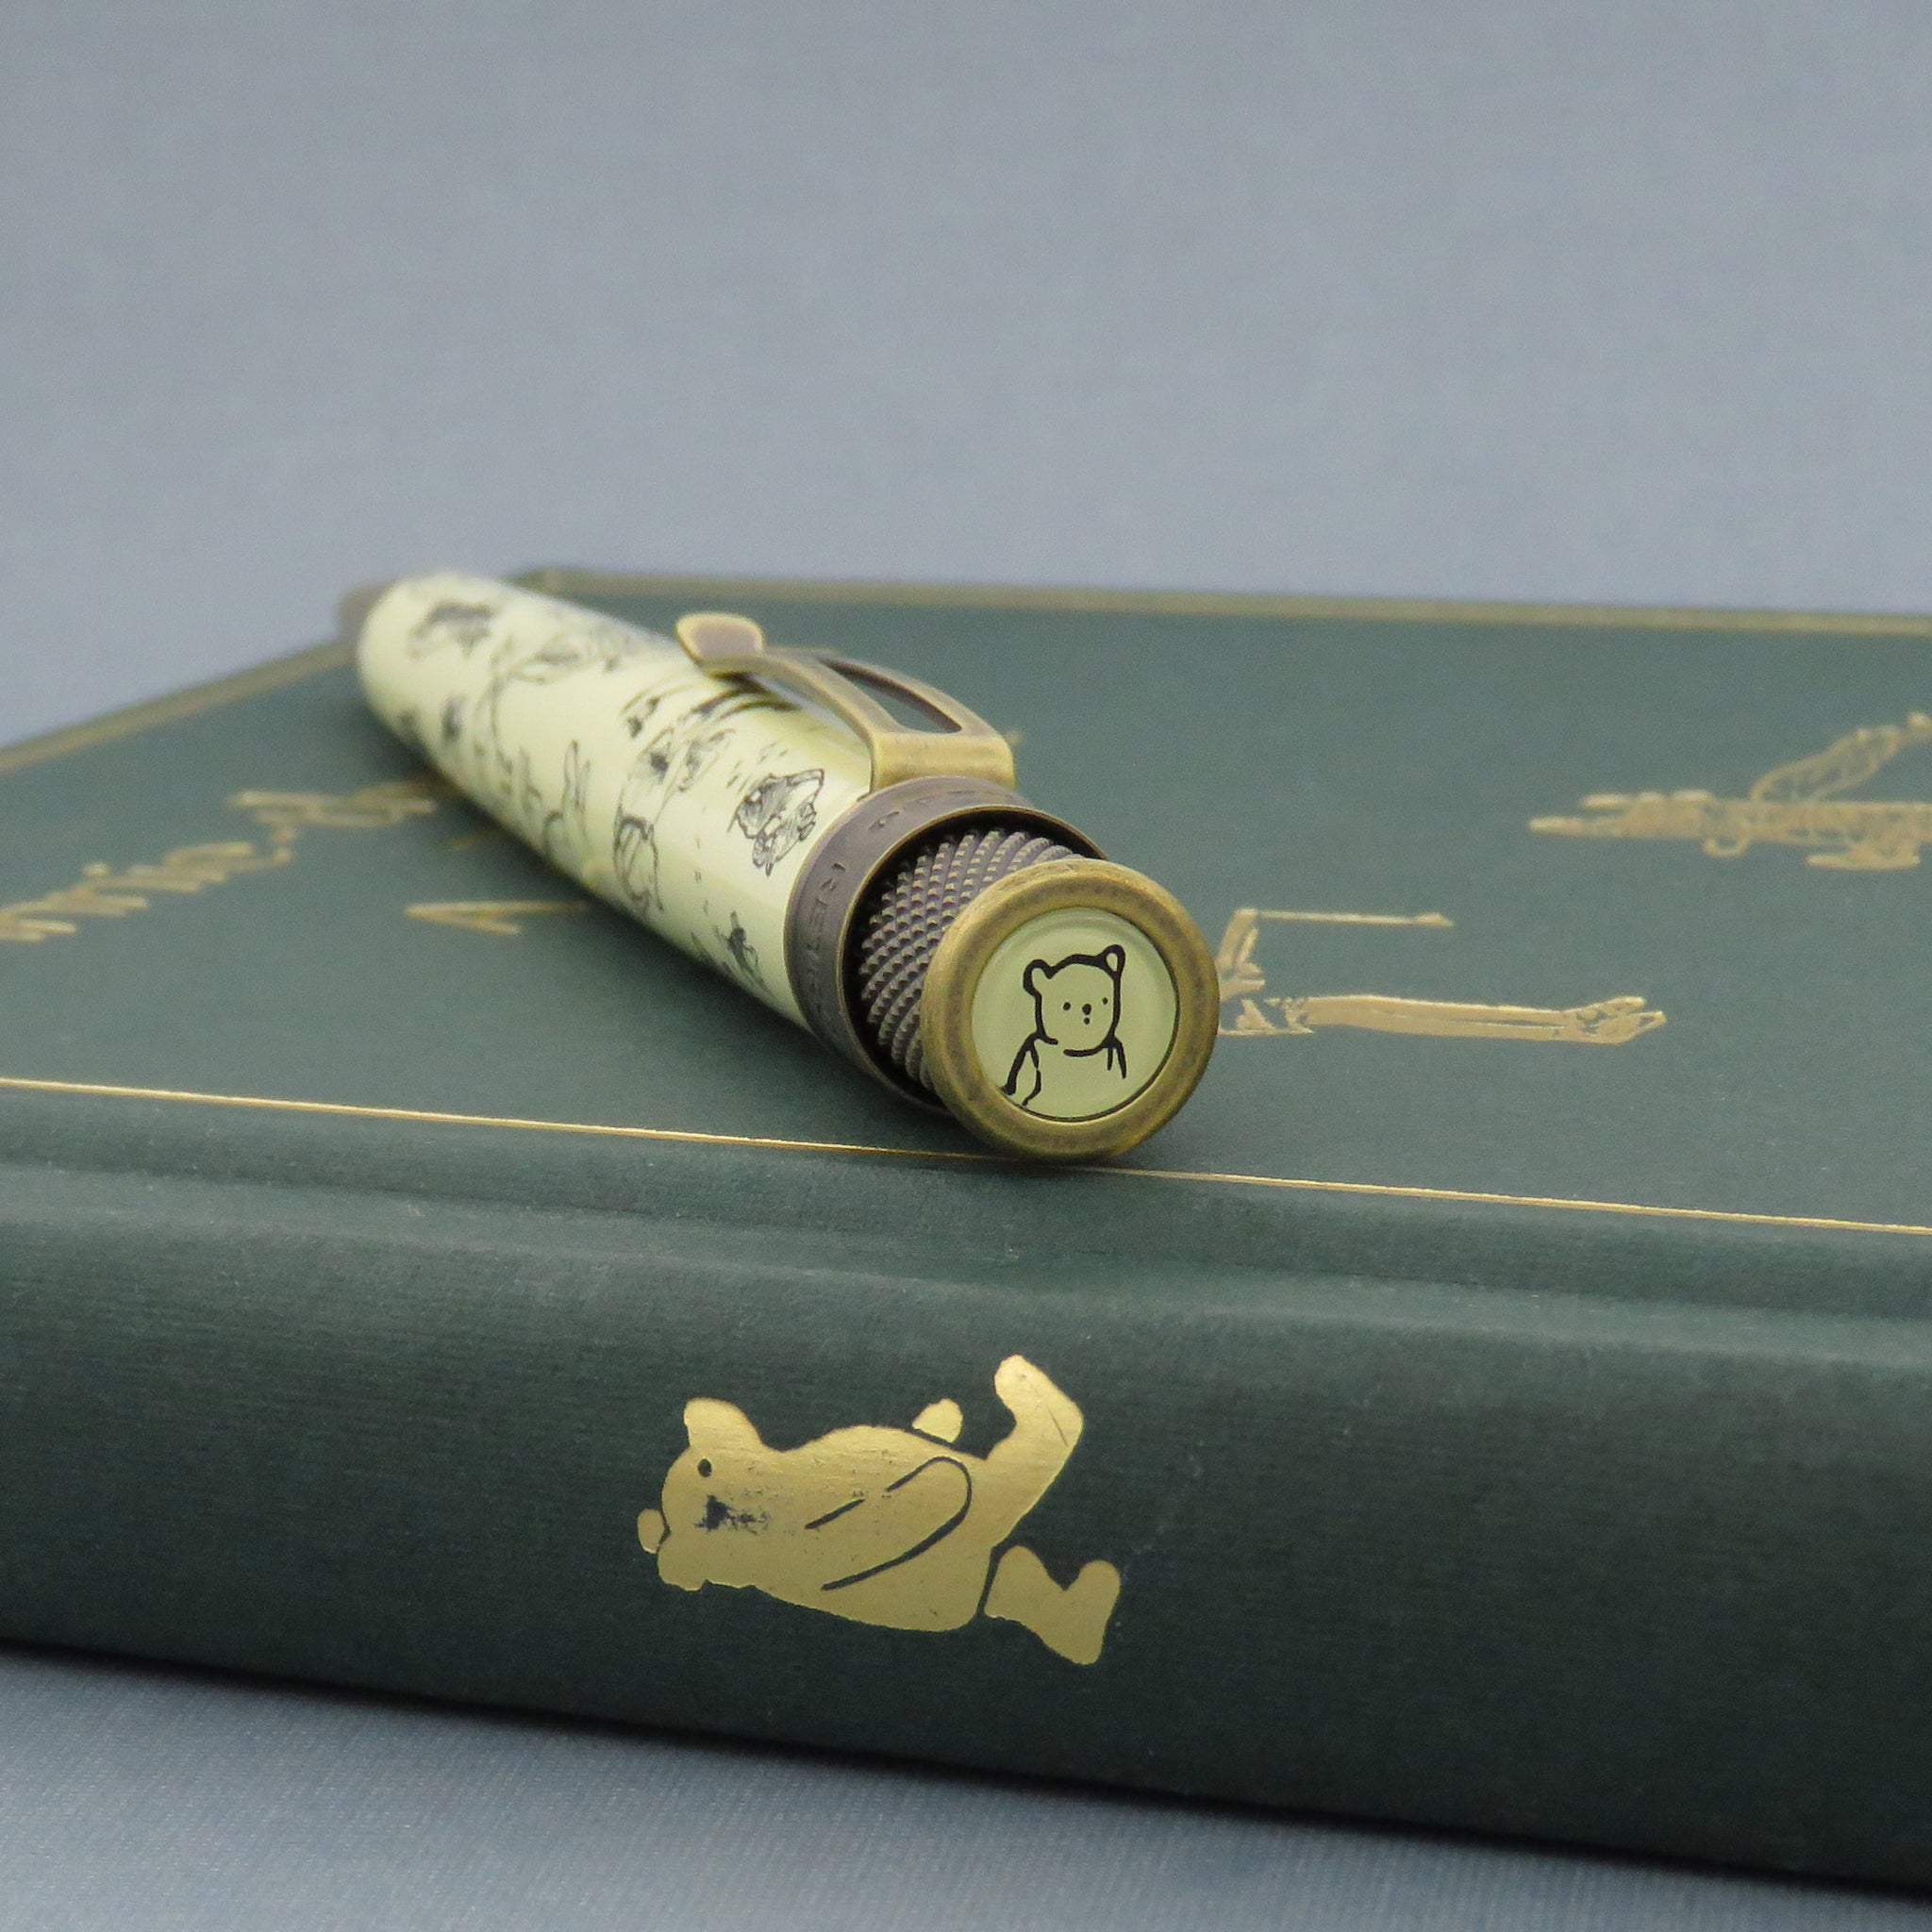 A.A. Milne Winnie-the-Pooh Decorations by E.H. Shepard Rollerball Pen